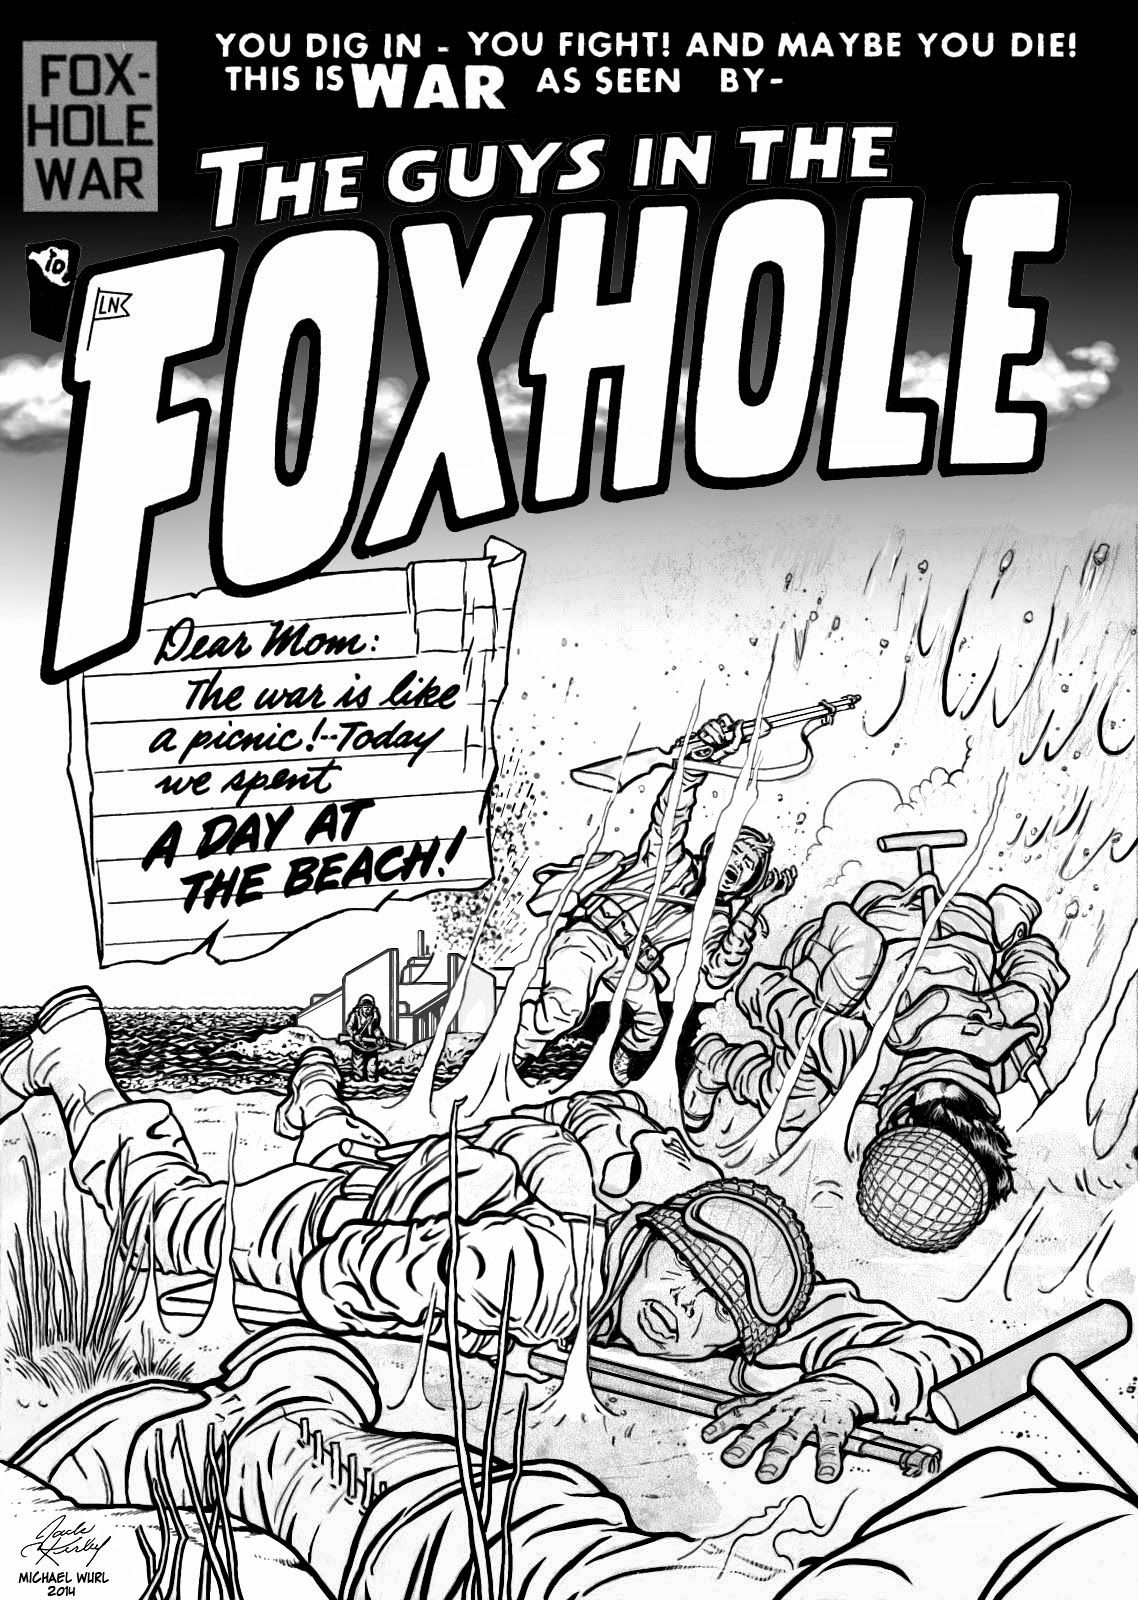 kirby unpublished foxhole cover inked 1